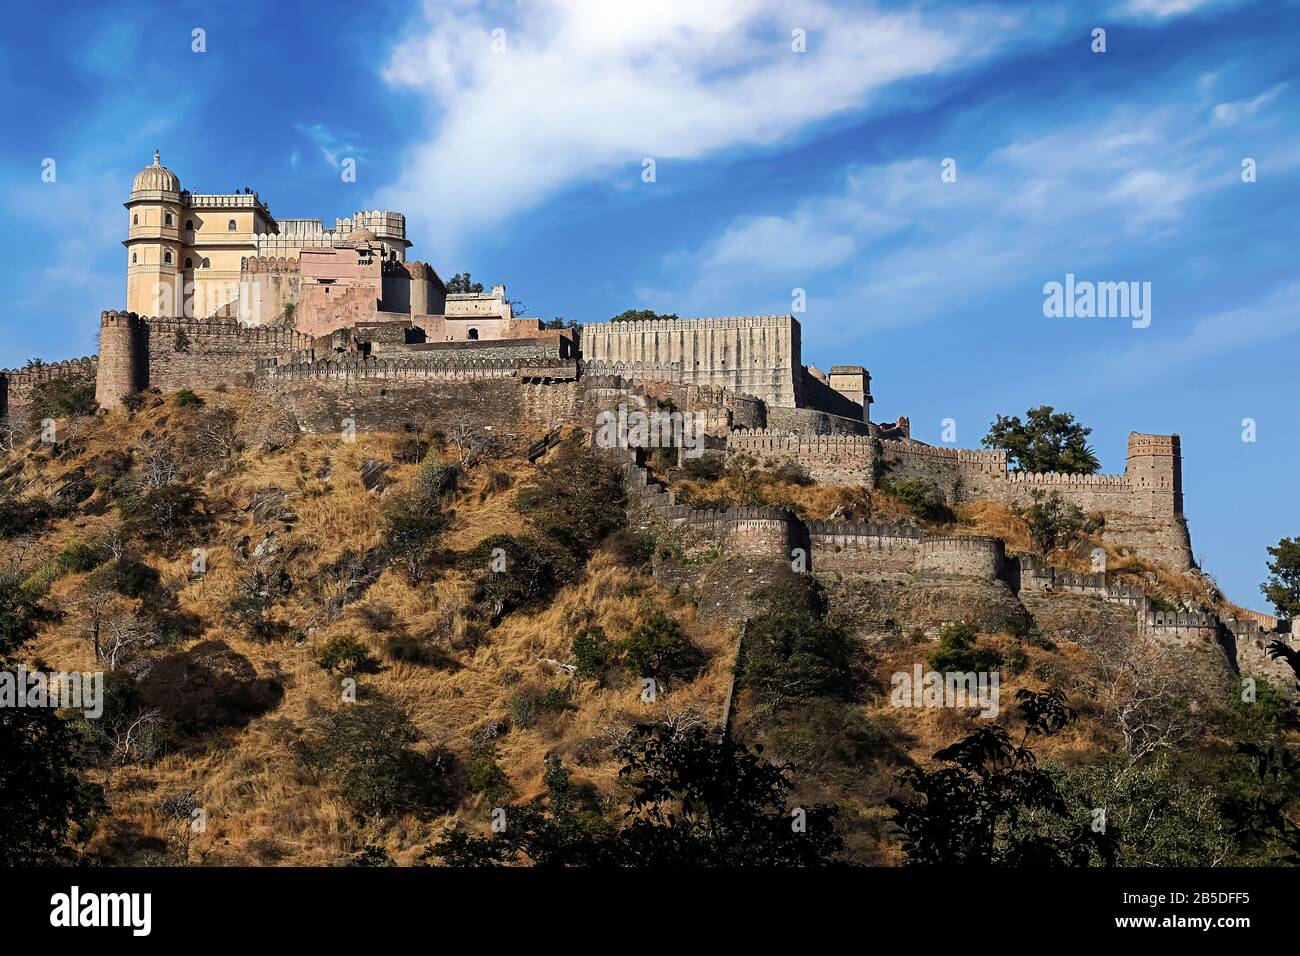 Kumbhalgarh Fort Rajasthan at sunset. Kumbhalgarh is a Mewar fortress in the Rajsamand District of Rajasthan state in western India Stock Photo